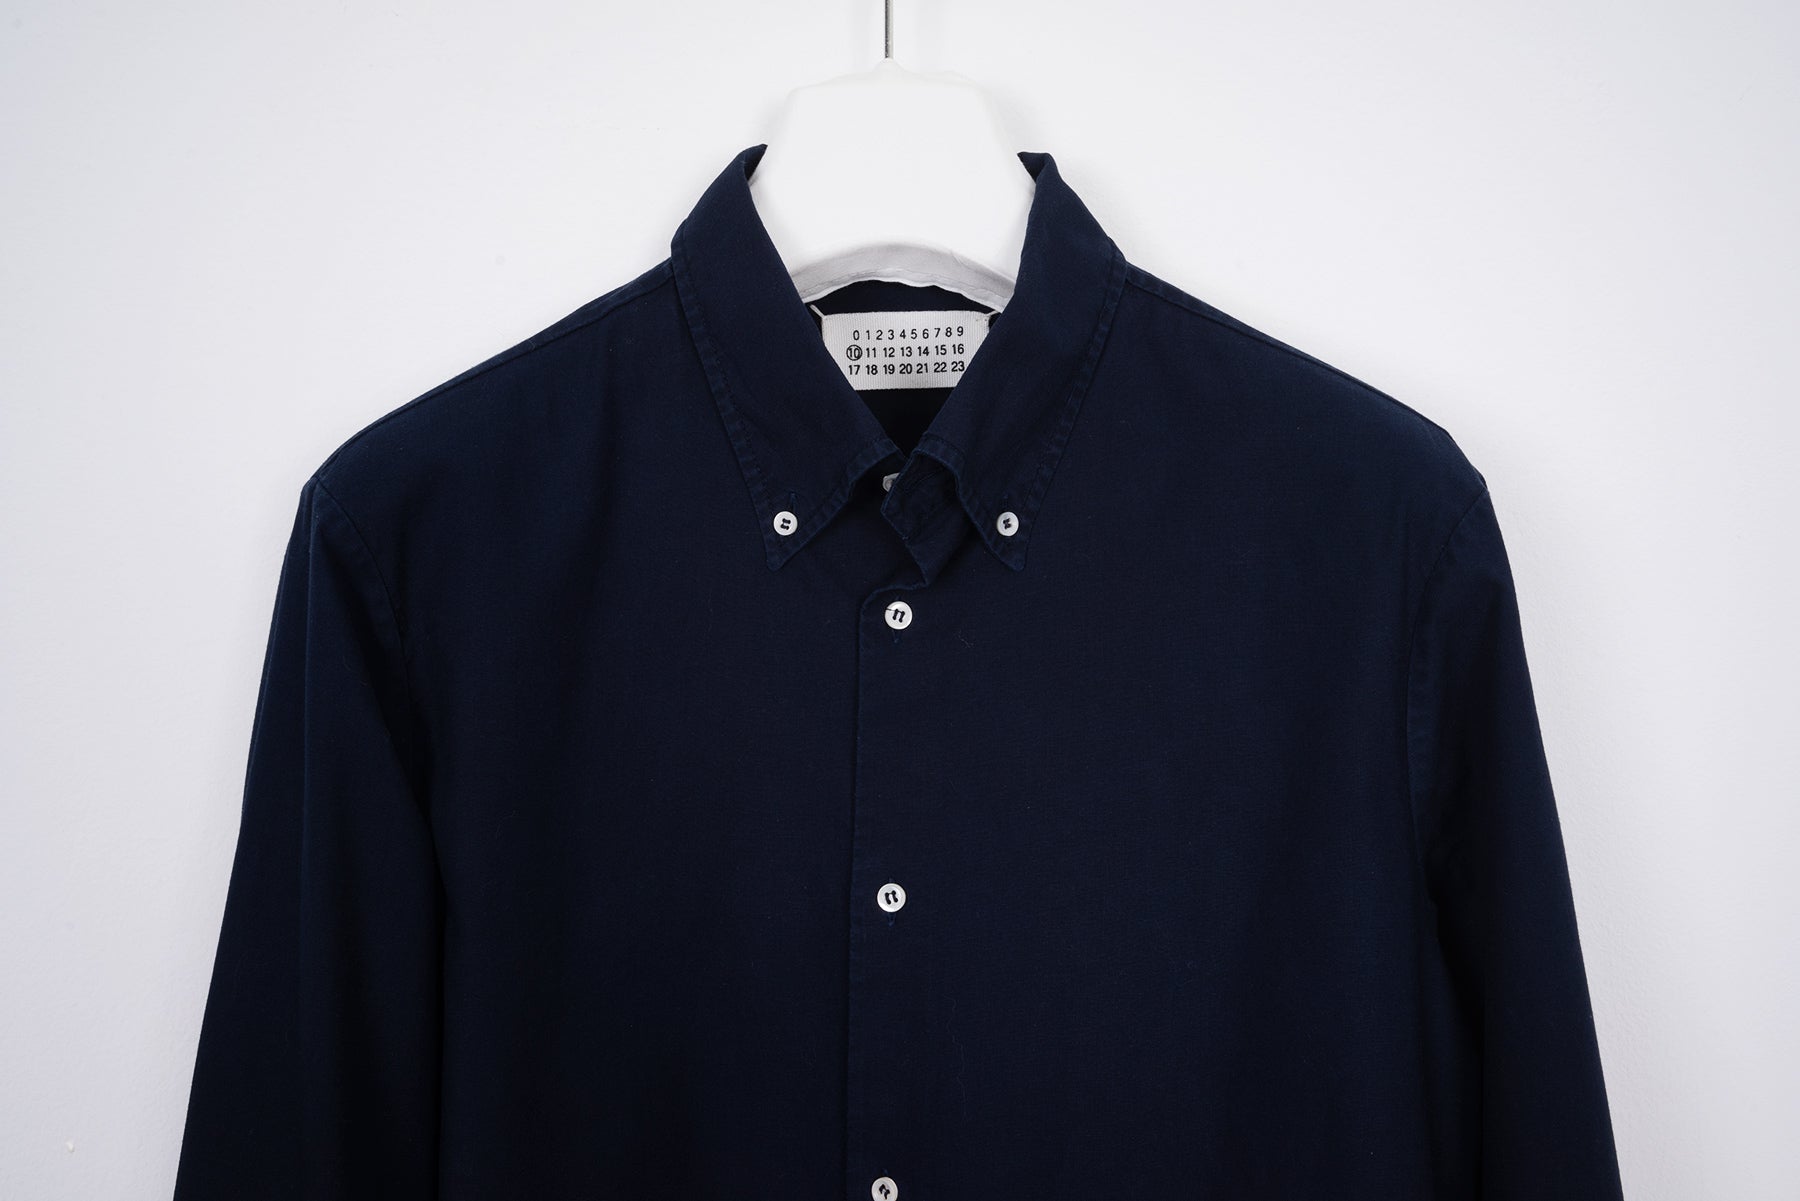 2004 S/S BUTTON-DOWN COLLAR CLASSIC SHIRT IN NAVY BLUE